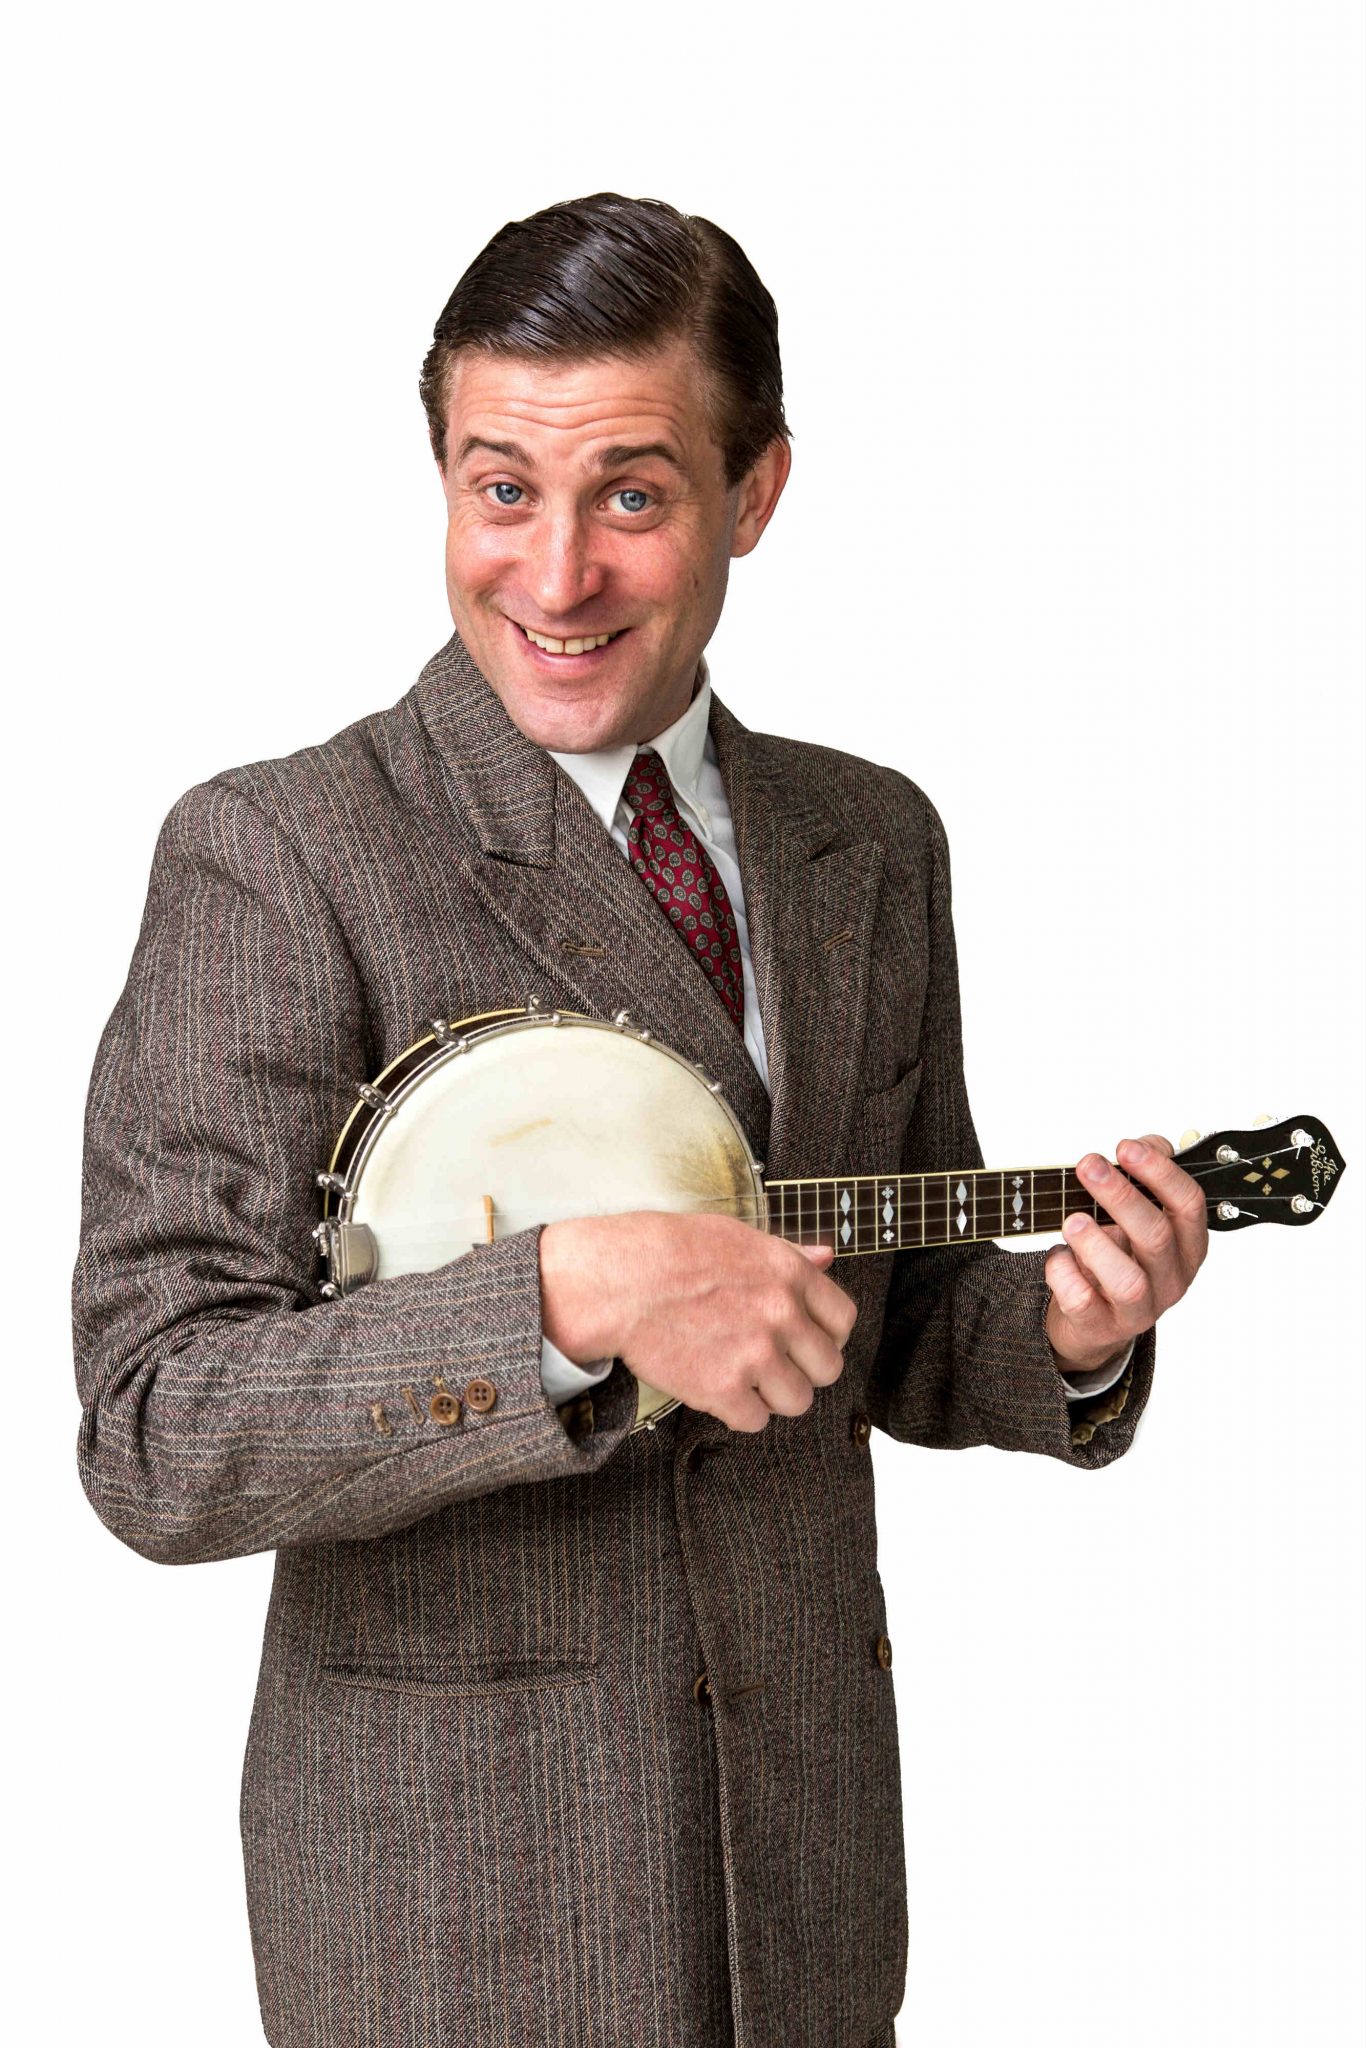 Remember George Formby? – ‘Uke’ love this tribute here in Halton